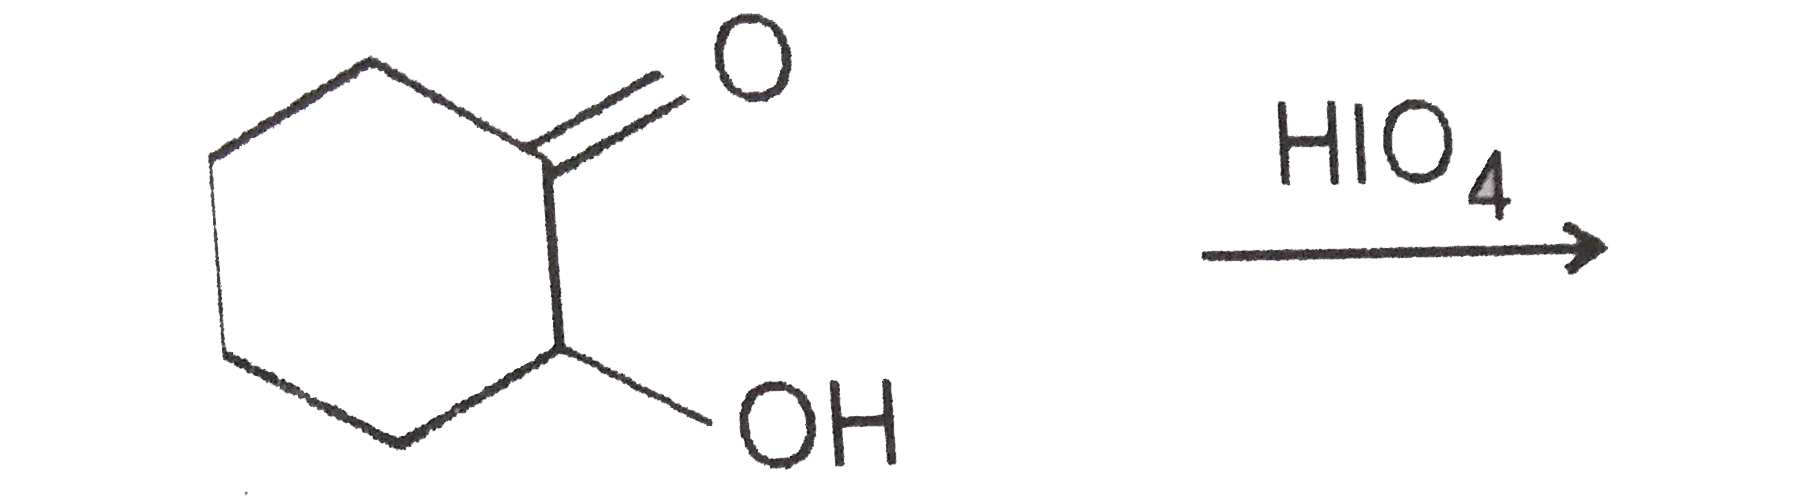 The product obtained in the following reaction is